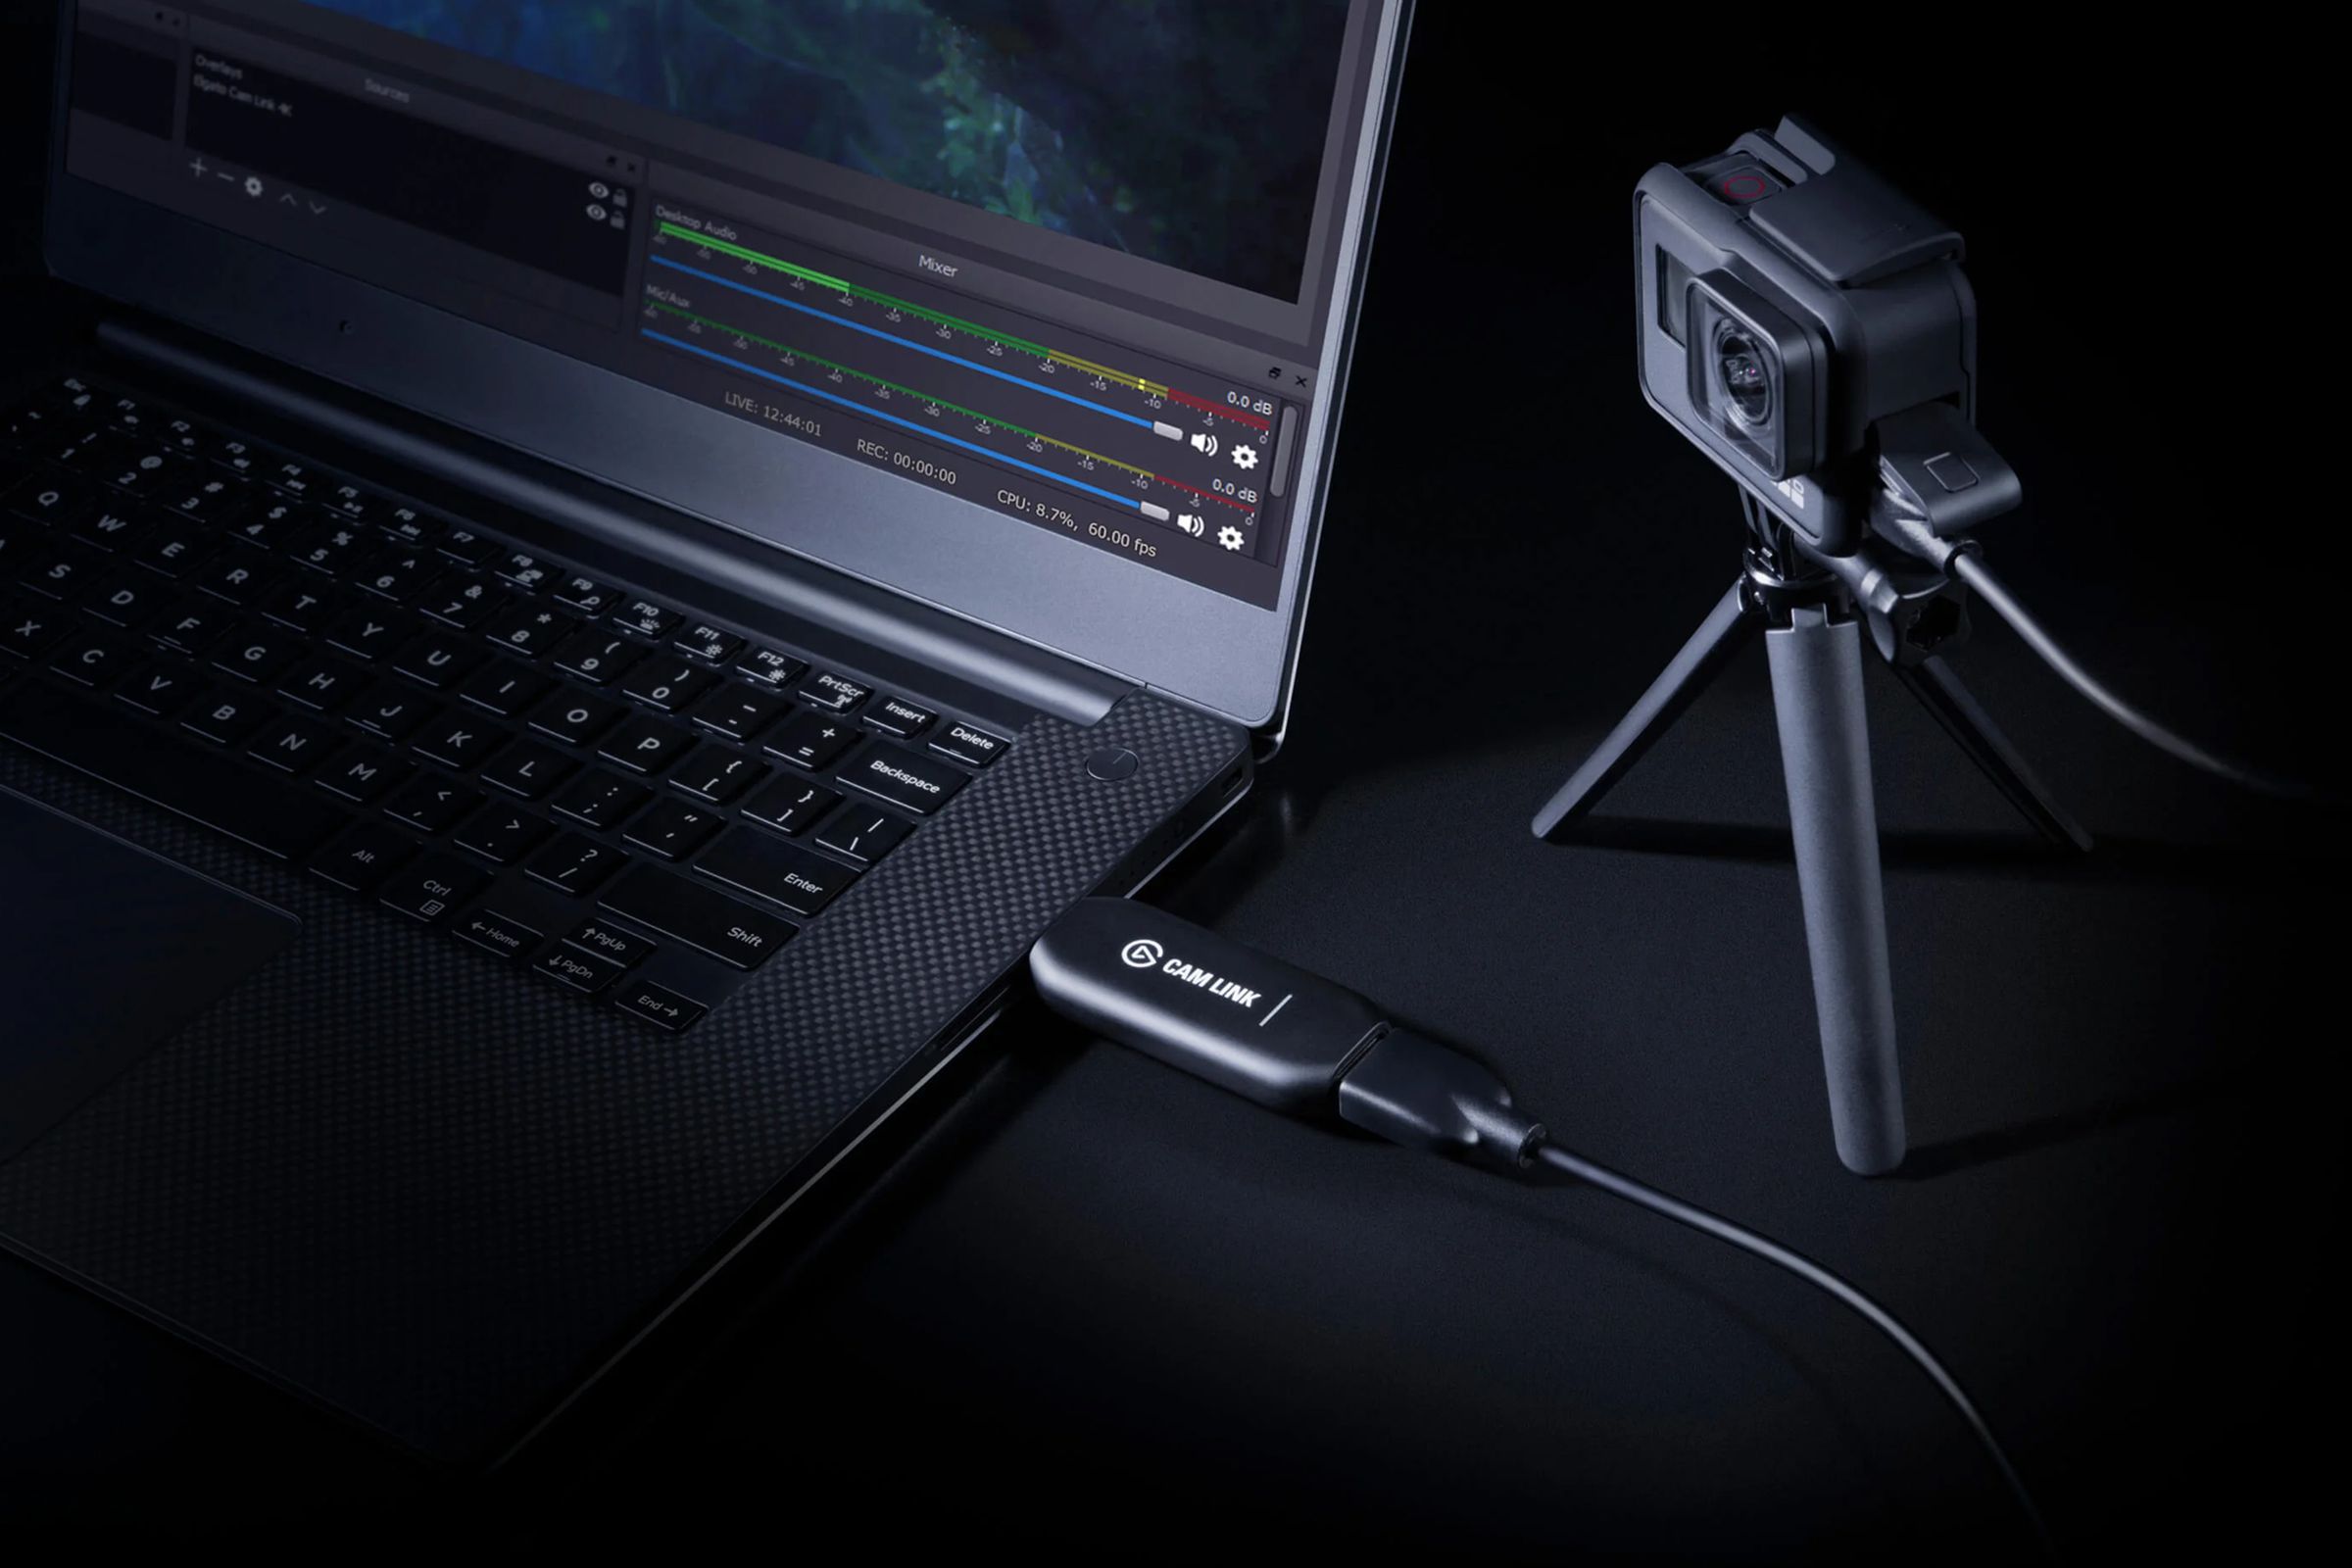 Elgato’s Cam Link 4K dongle plugged into the USB port of a laptop, with a GoPro action camera plugged into its HDMI port.